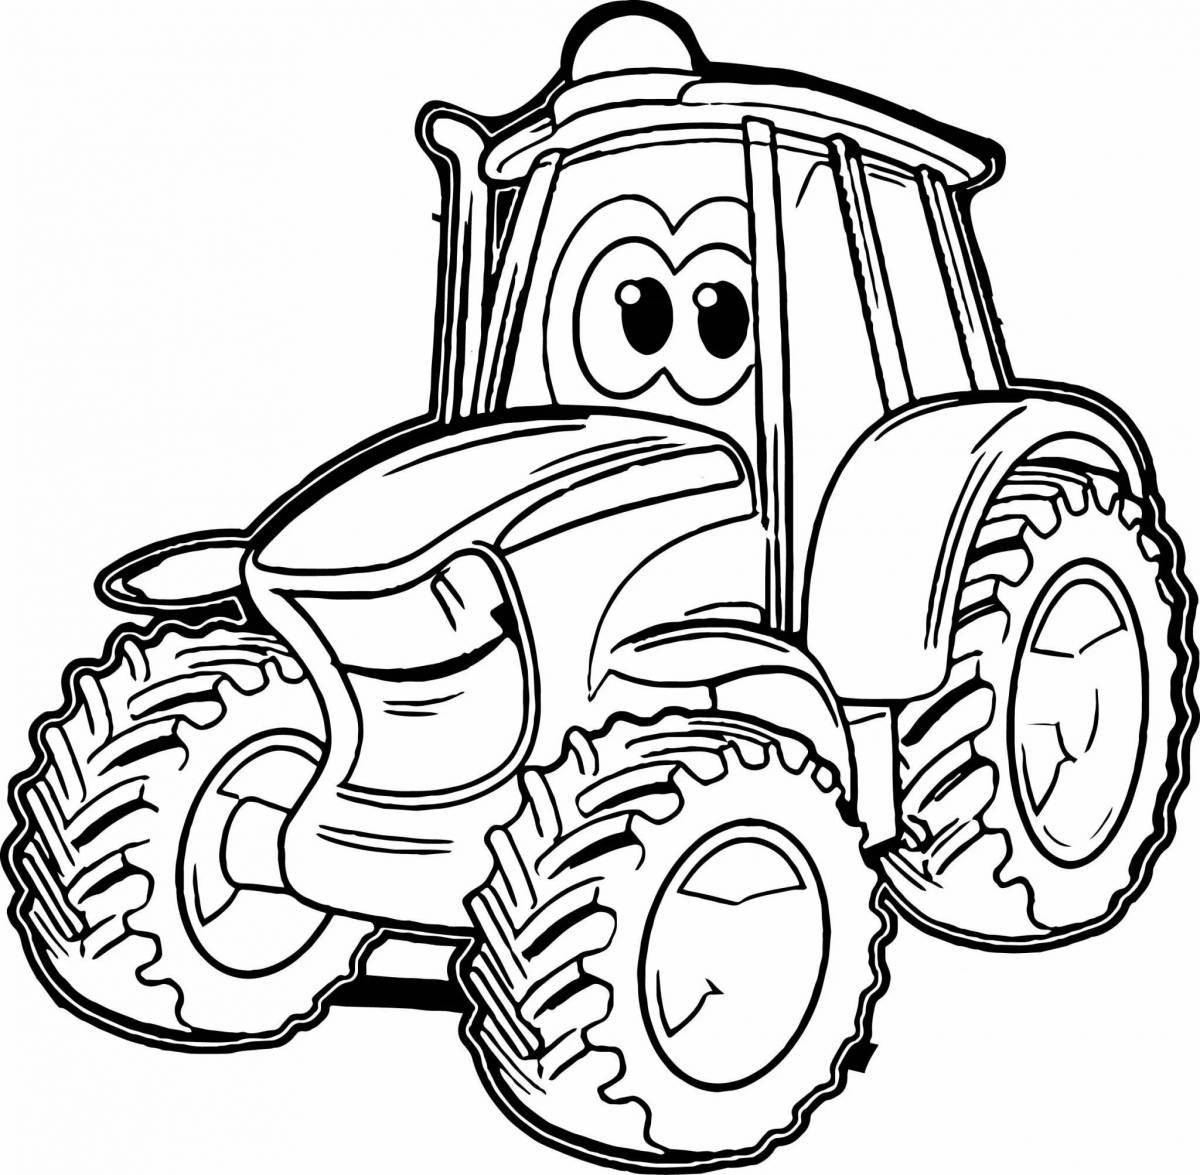 Coloring page beckoning blue tractor